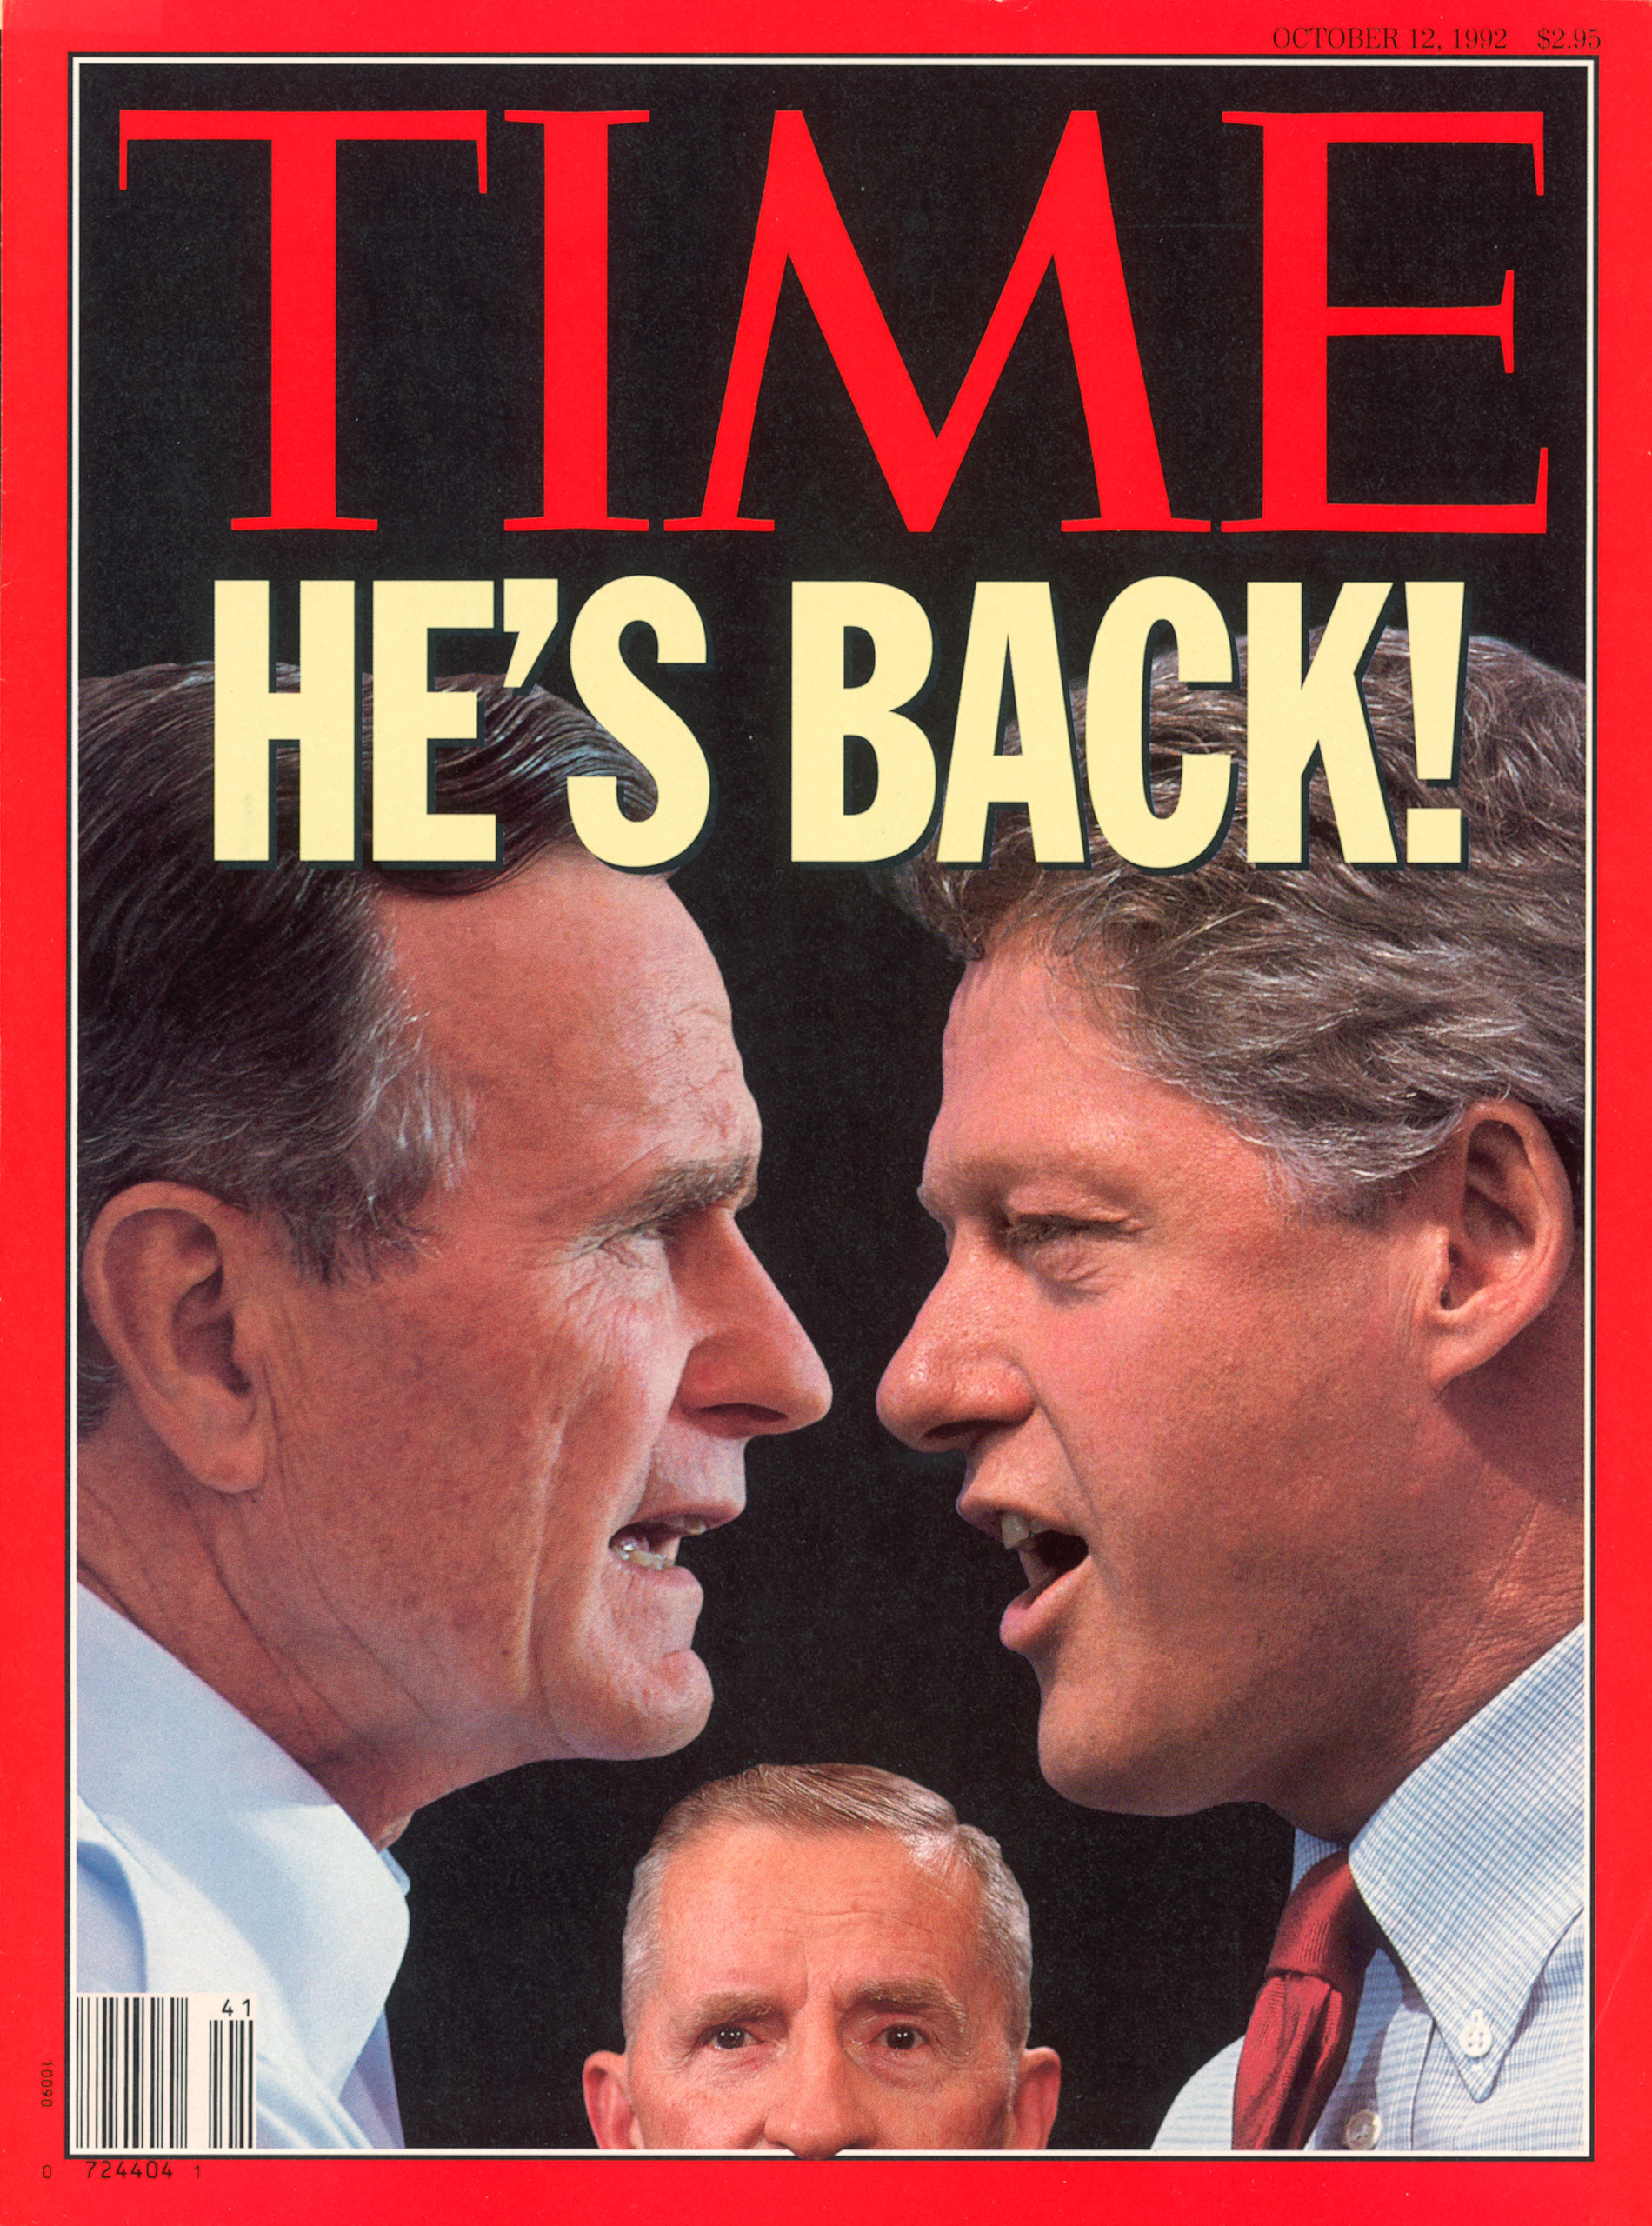 George H.W. Bush, Bill Clinton and H. Ross Perot on the Oct. 12, 1992, cover of TIME Cover photos: George H. W. Bush, Bill Clinton and Ross Perot; Bush by Diana Walker, Clinton by Steve Liss, Perot by Shelly Katz-Black Star.